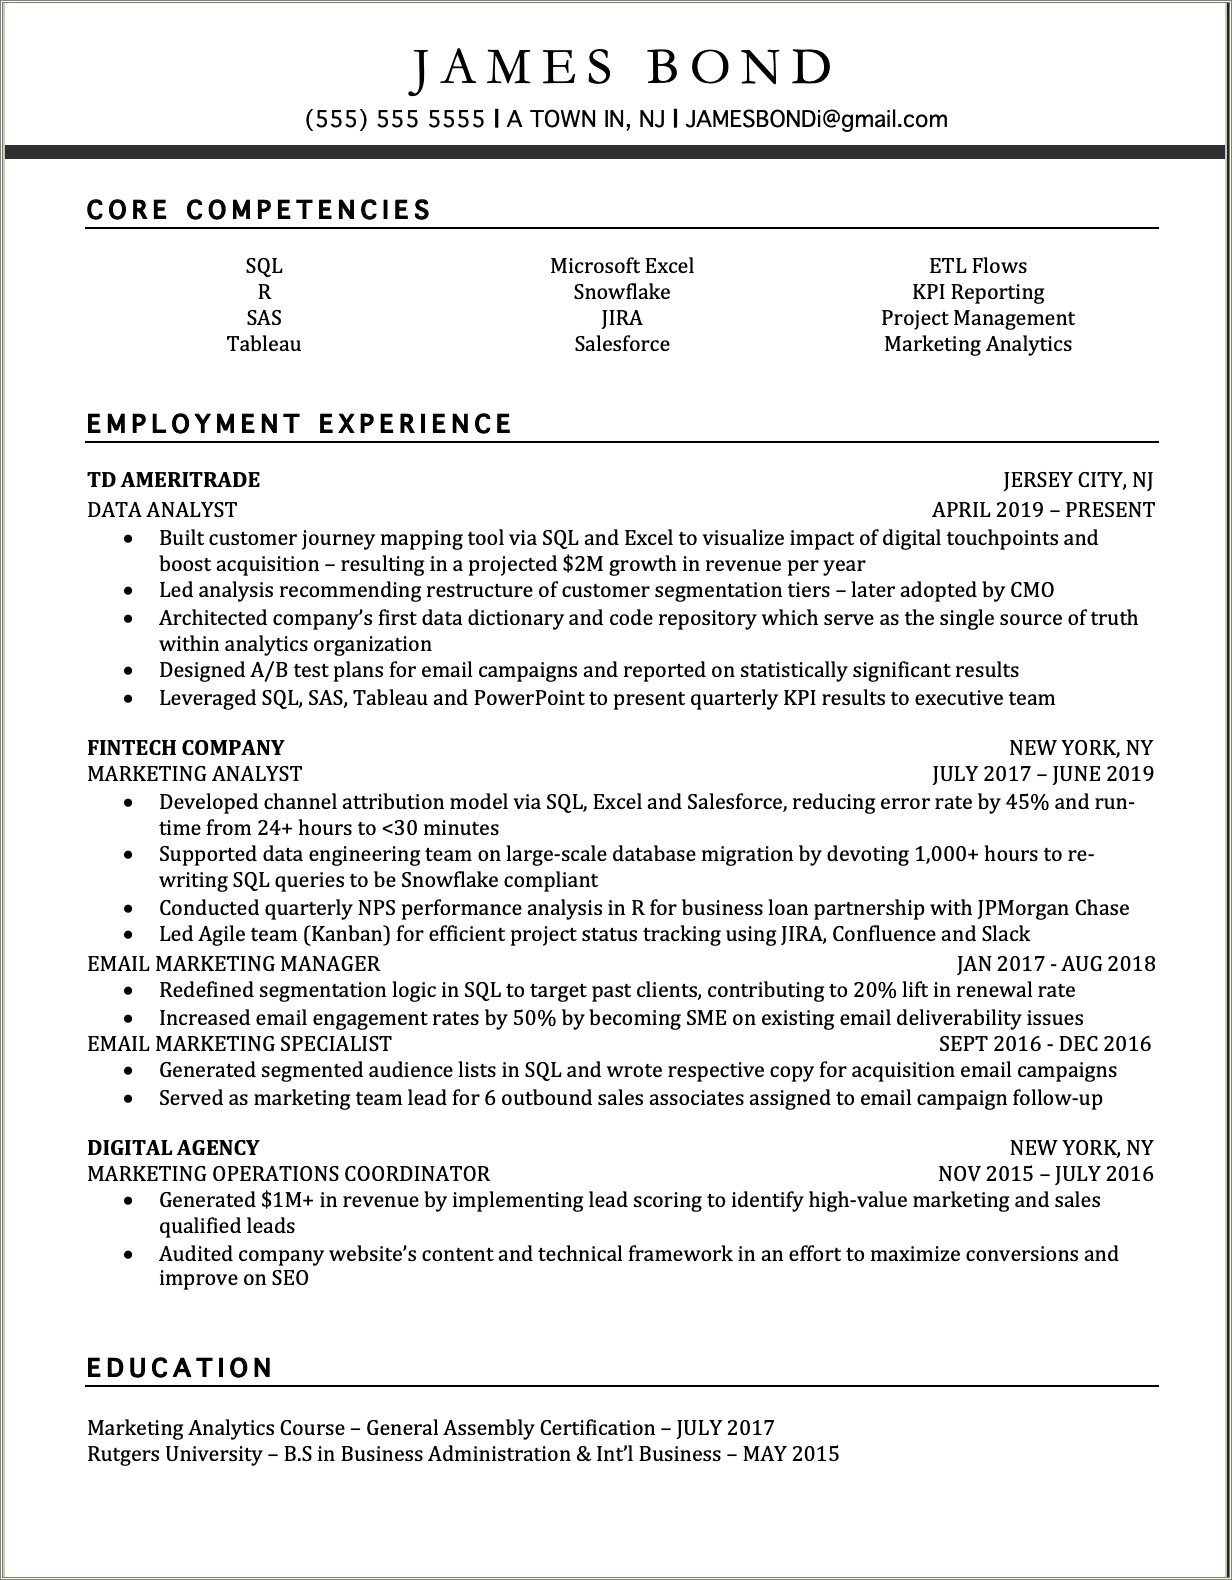 Writing A Resume For Jobs In Same Company